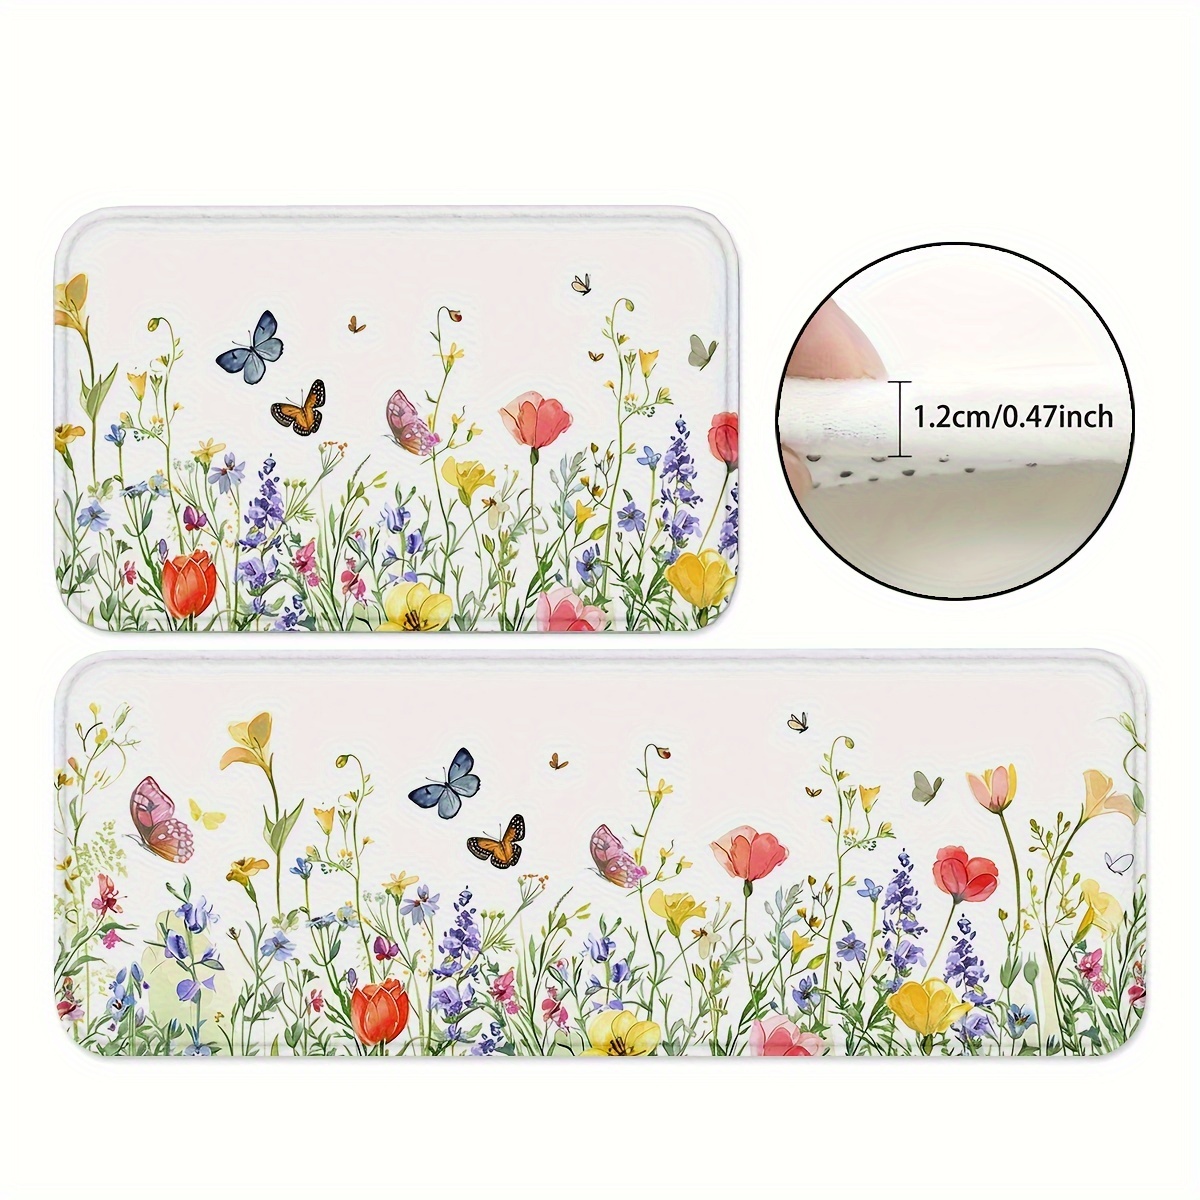 

1pc/2pcs, Spring Flowers Kitchen Mats, Non-slip And Durable Bathroom Pads For Floor, Comfortable Standing Runner Rugs, Carpets For Kitchen, Home, Office, Laundry Room, Bathroom, Spring Decor